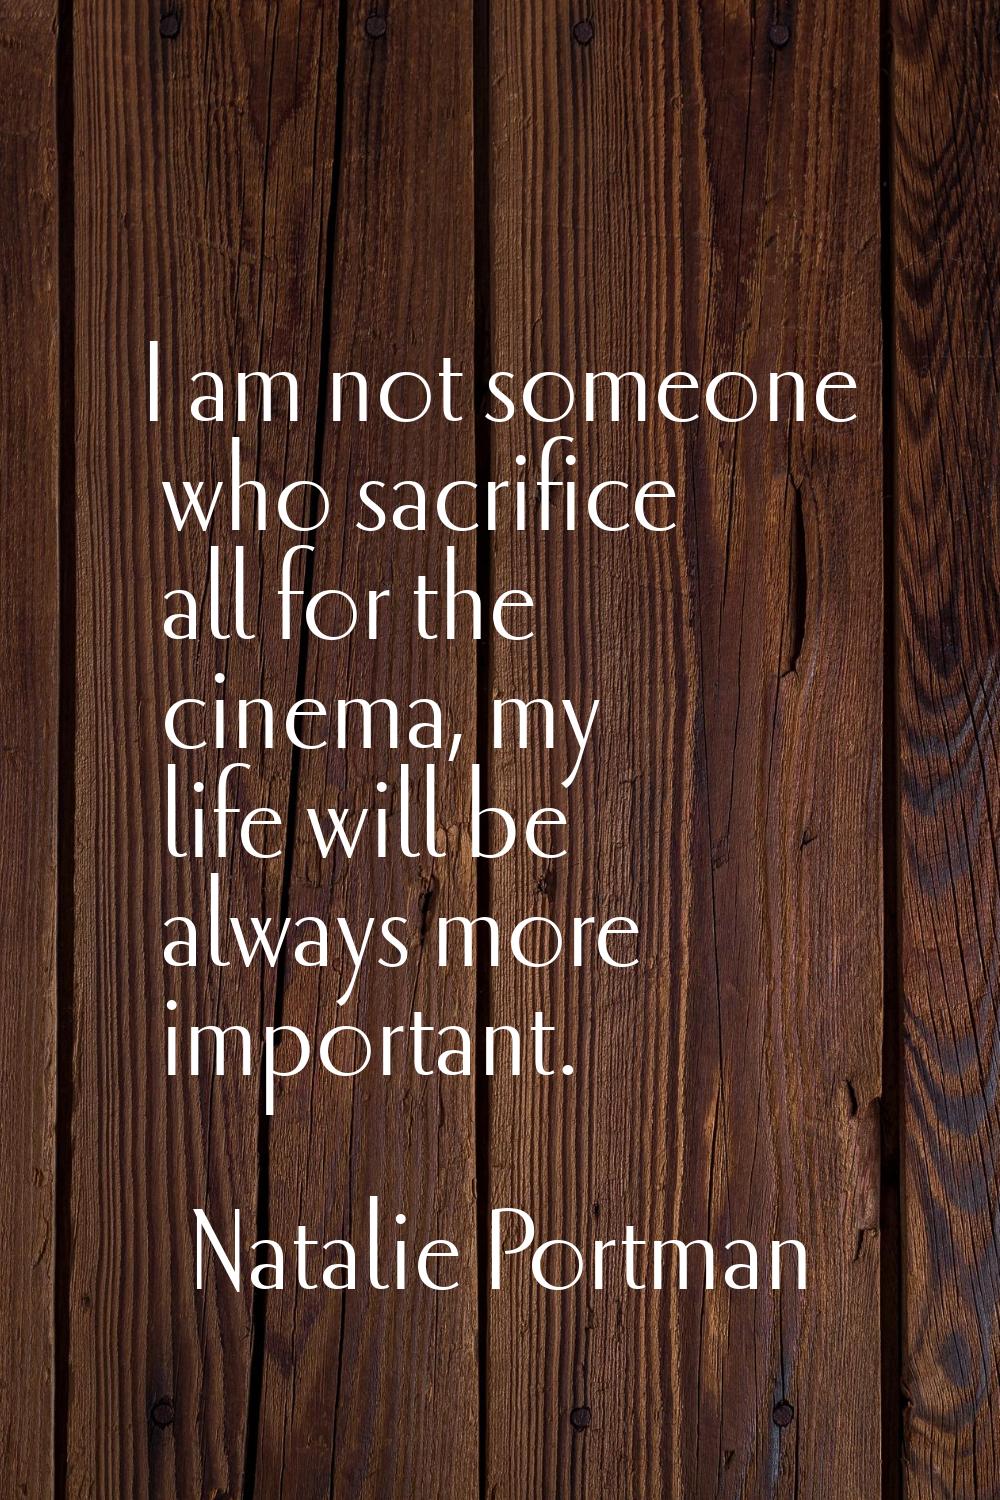 I am not someone who sacrifice all for the cinema, my life will be always more important.